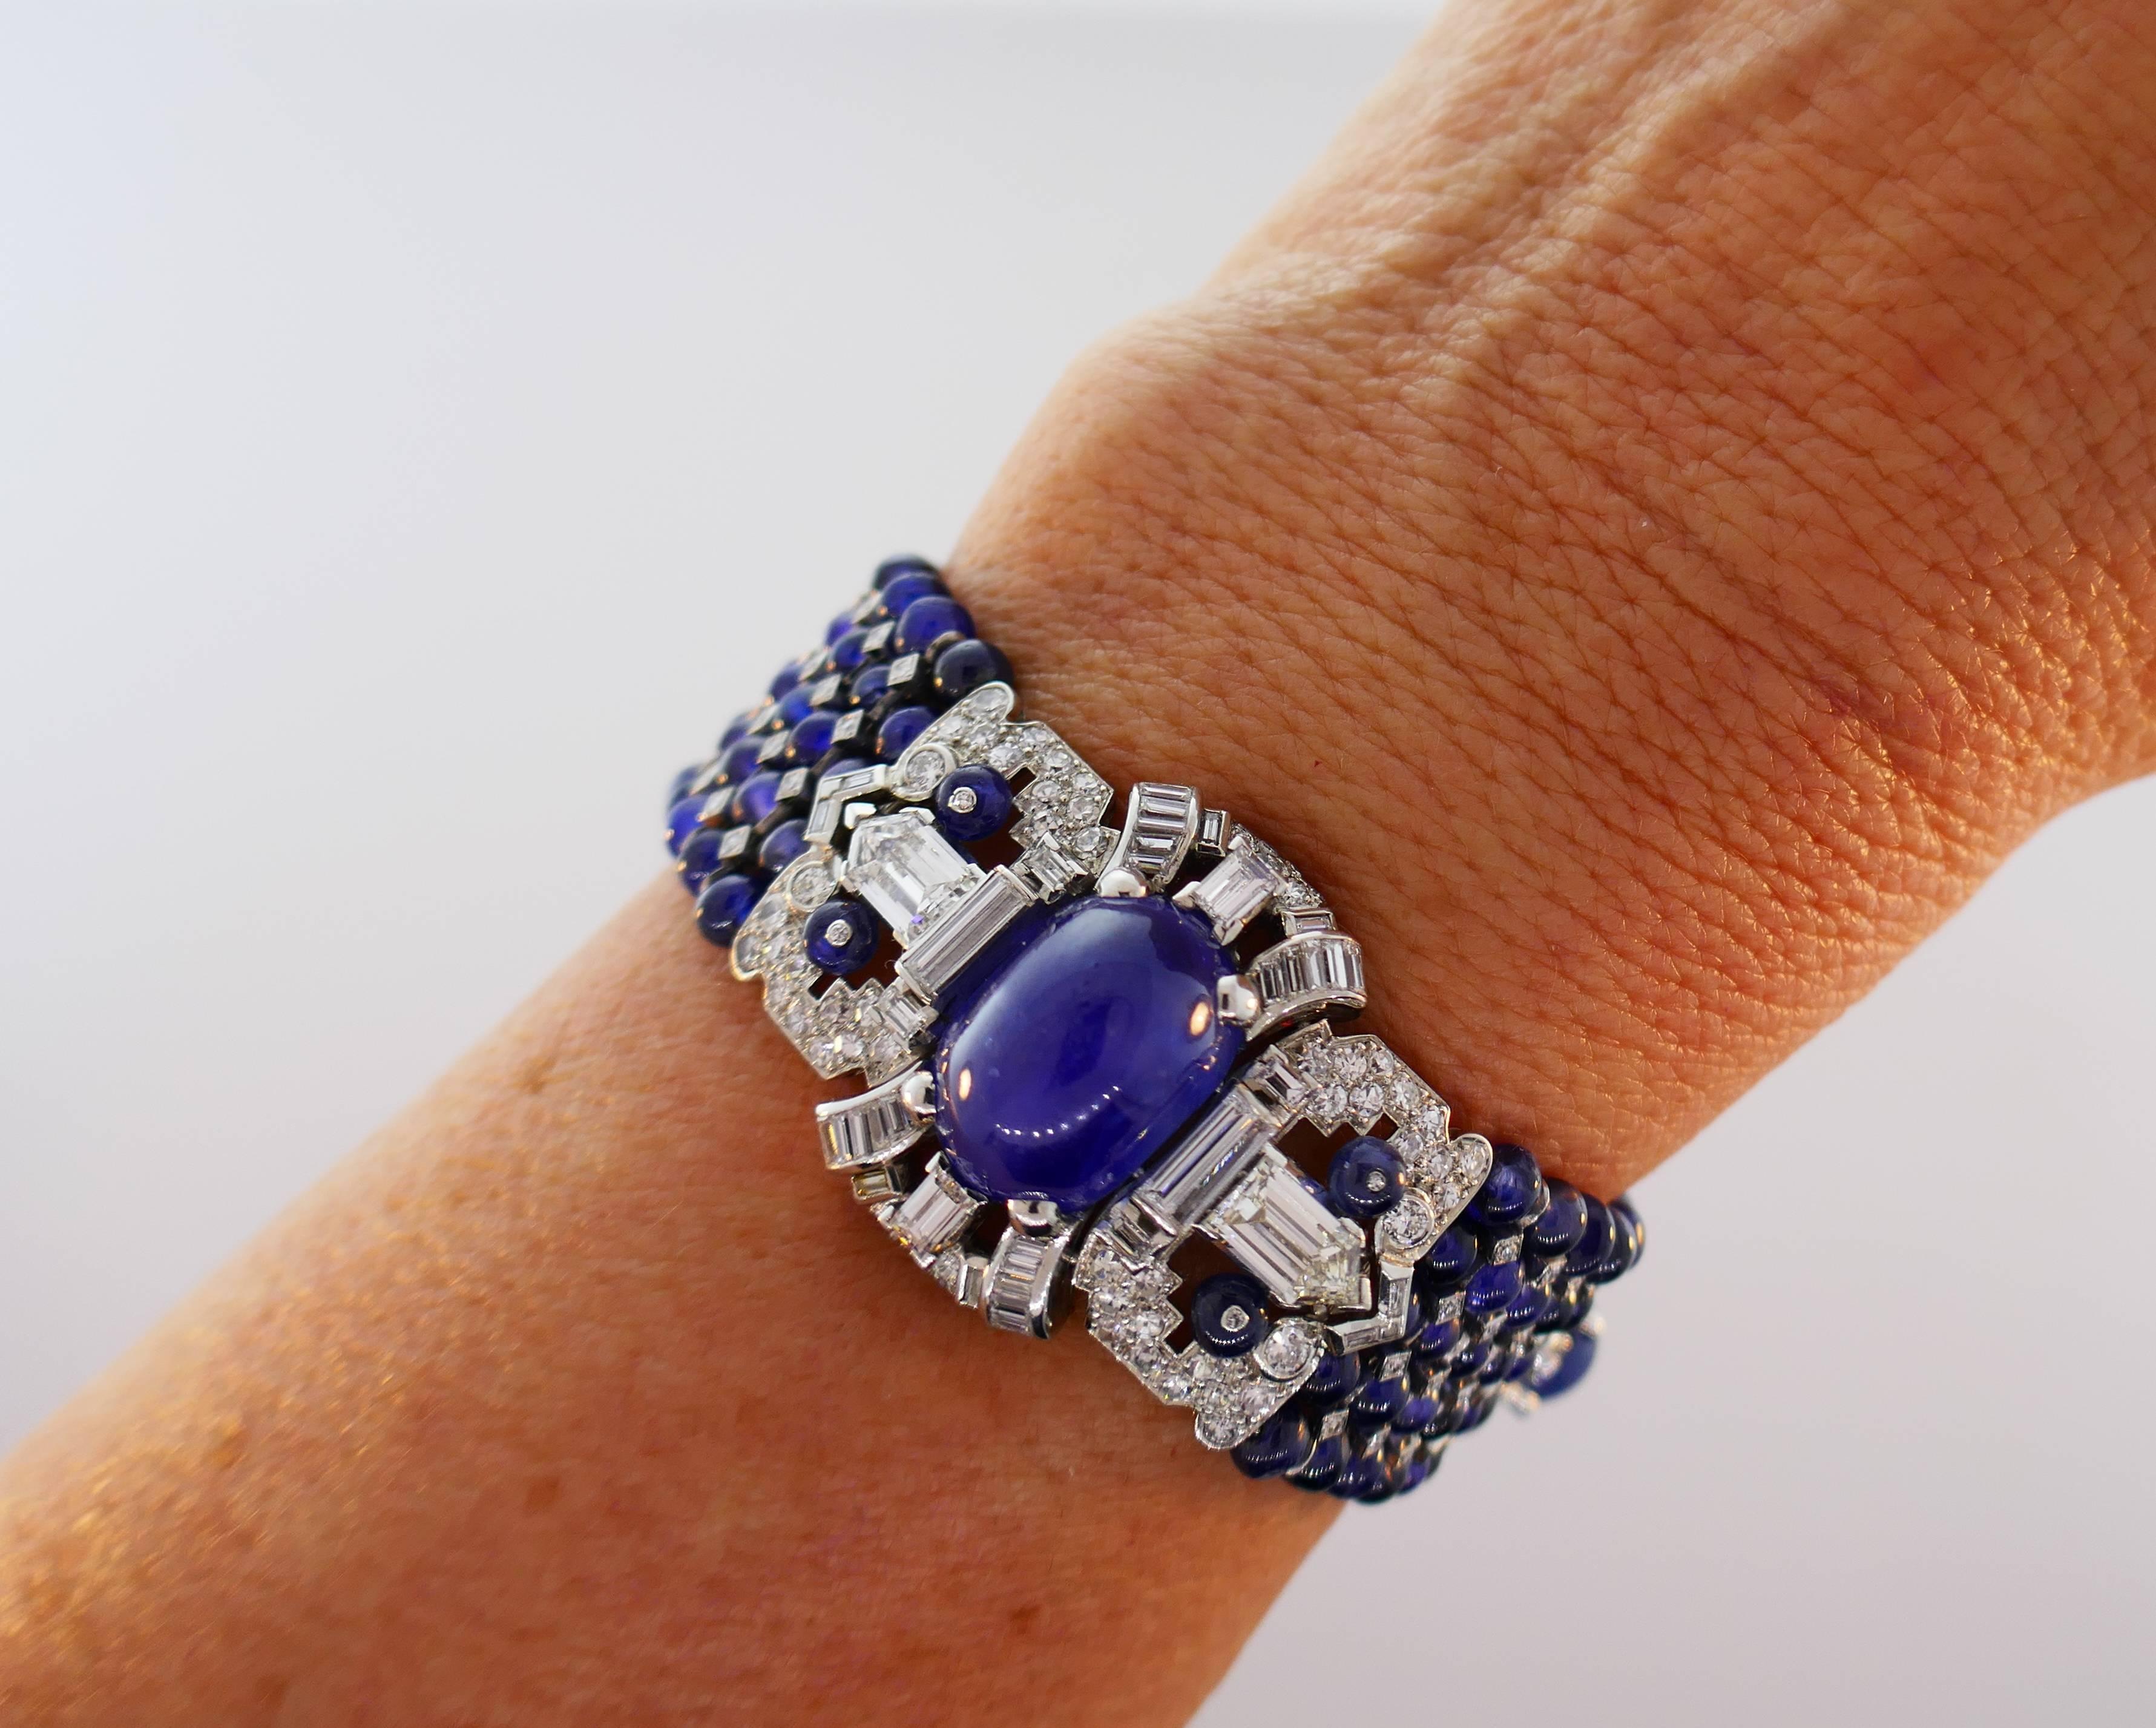 Stunning Art Deco bracelet featuring 17-carat natural not treated oval cabochon Star sapphire. The bracelet is made of platinum, cabochon star sapphires, sapphire beads and diamonds. The center 17-carat star sapphire comes with a Colored Stone